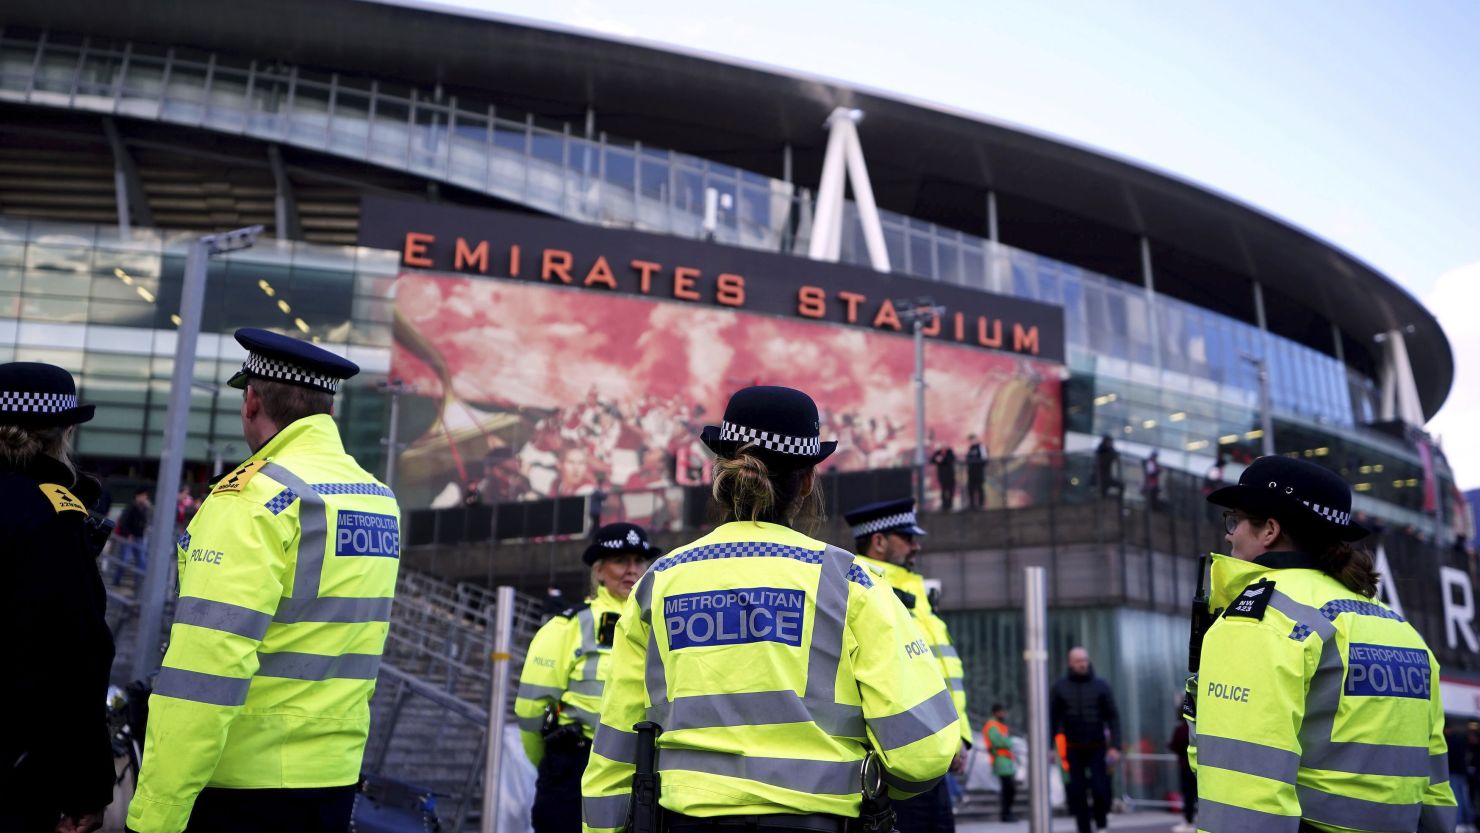 Police stand outside the stadium ahead of the Champions League quarterfinal between Arsenal and Bayern Munich.